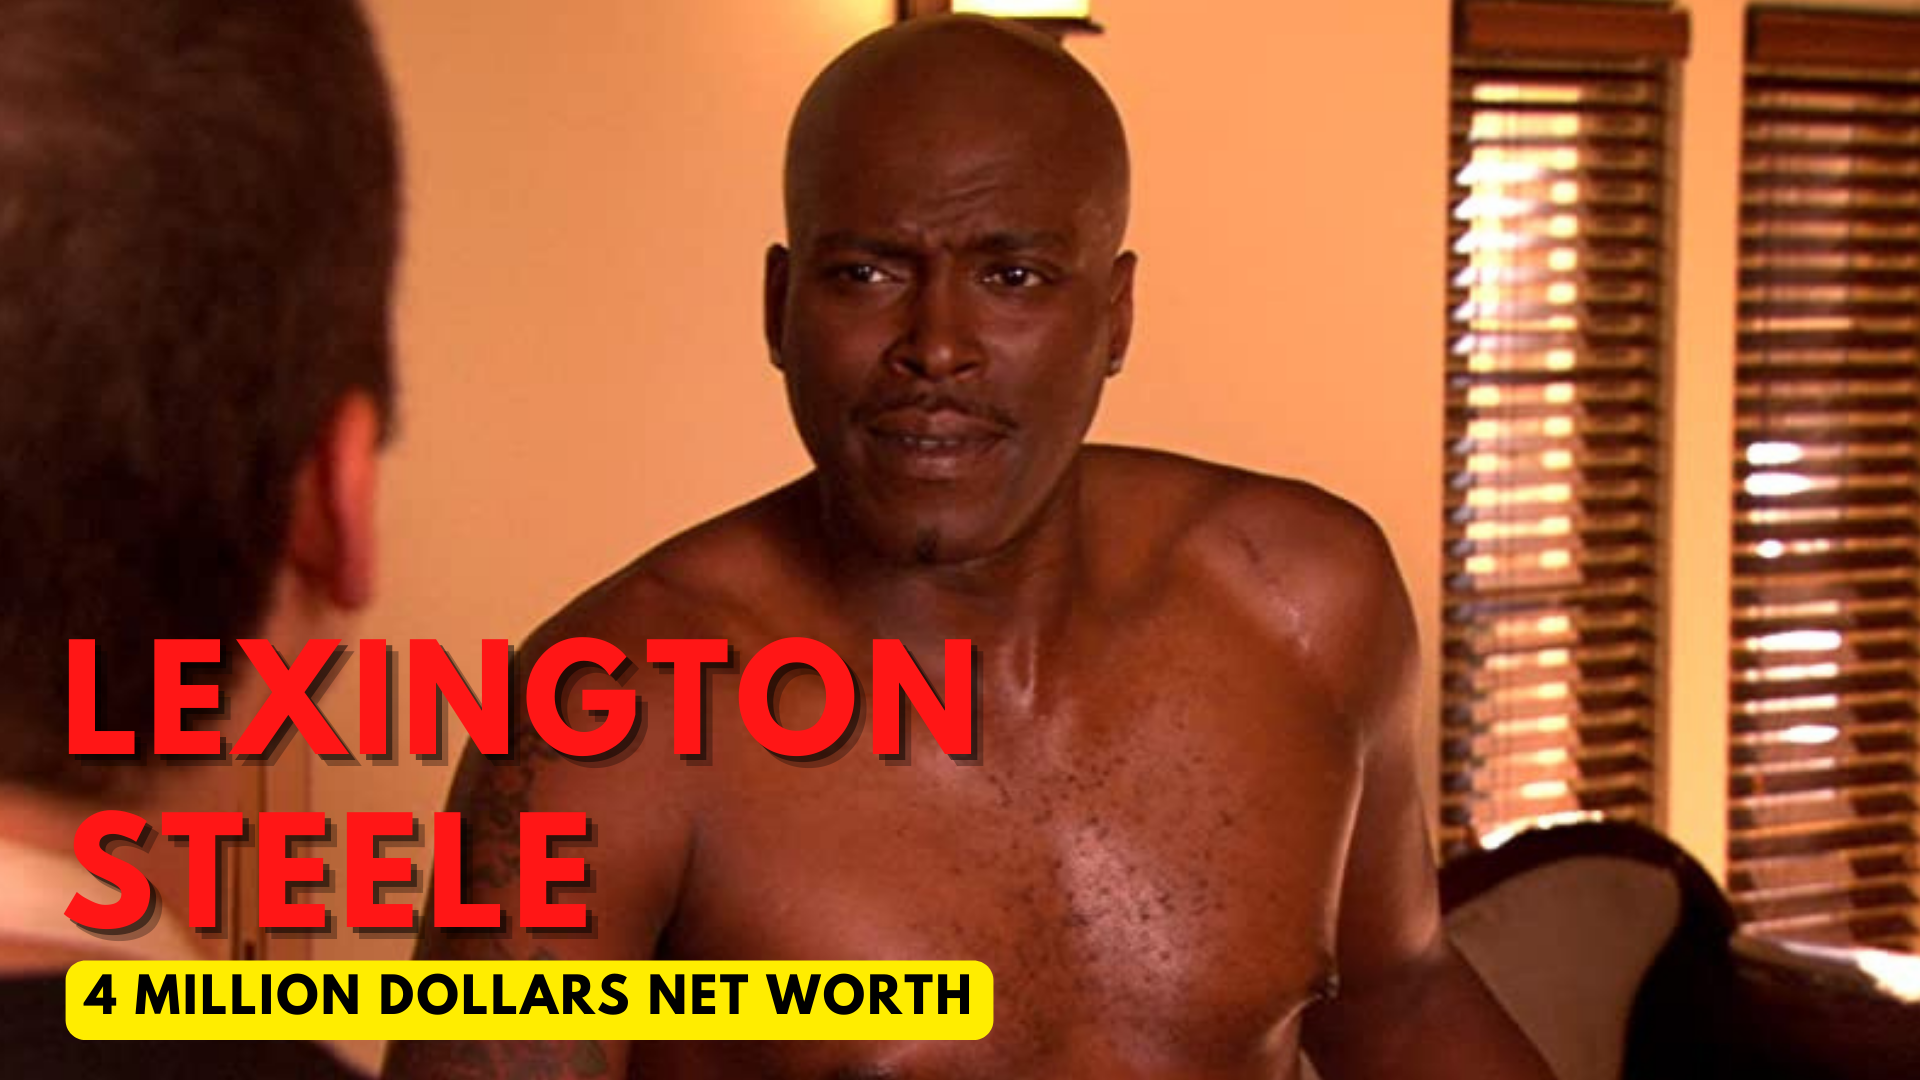 Lexington Steele topless while talking to someone